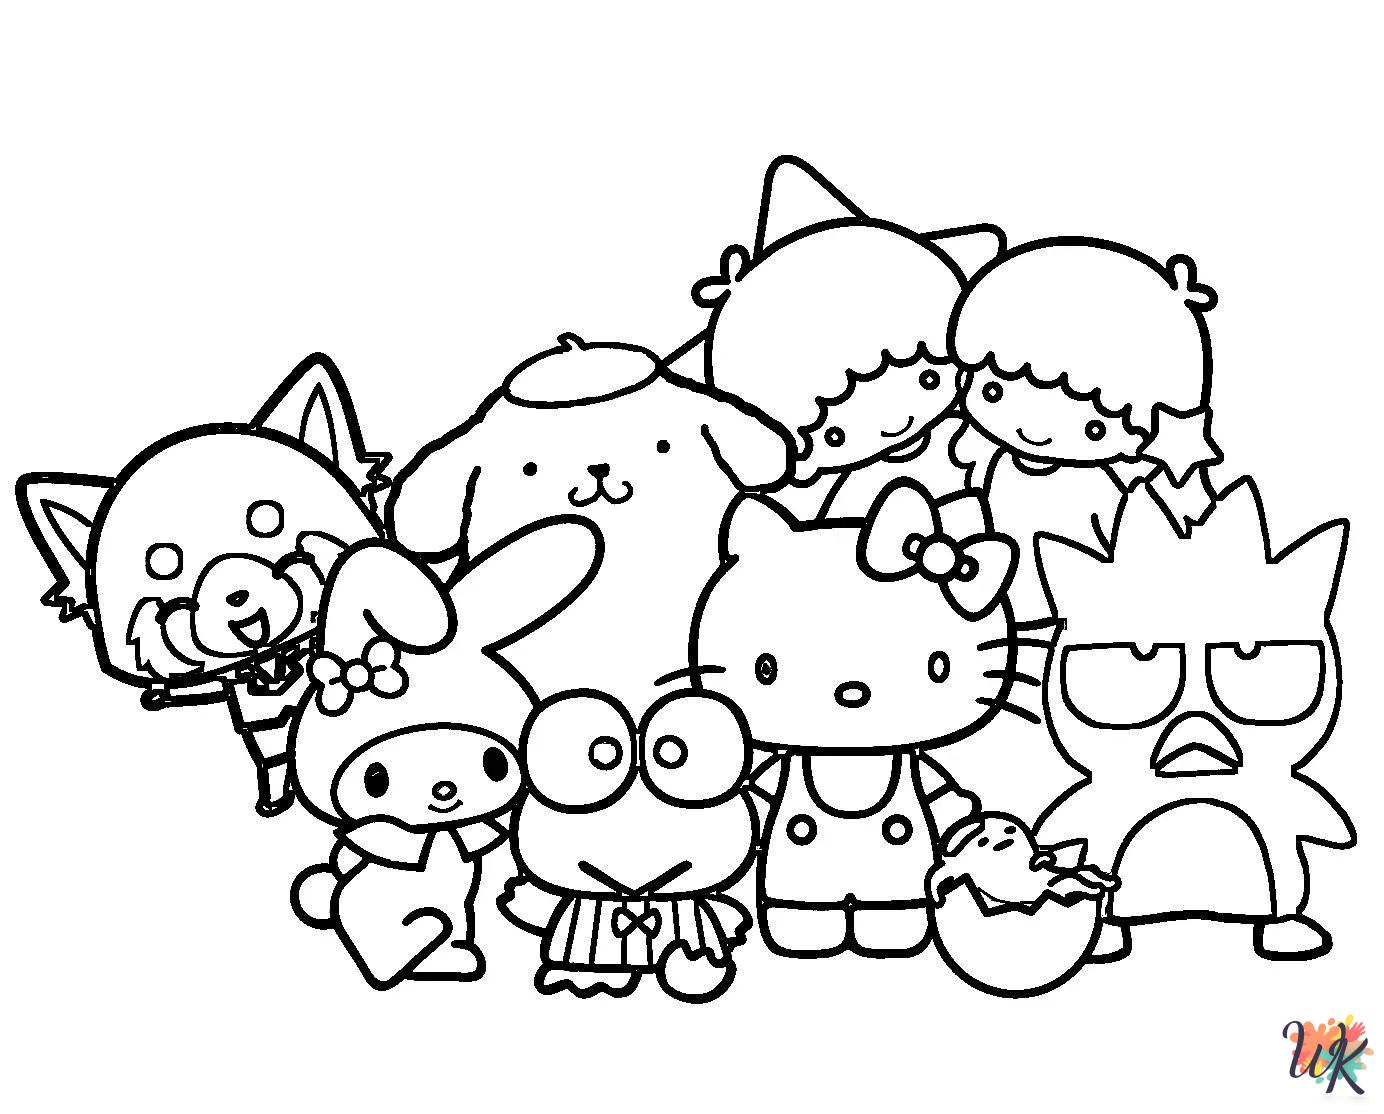 Sanrio Coloring Pages For Kids - ColoringPagesWK.com